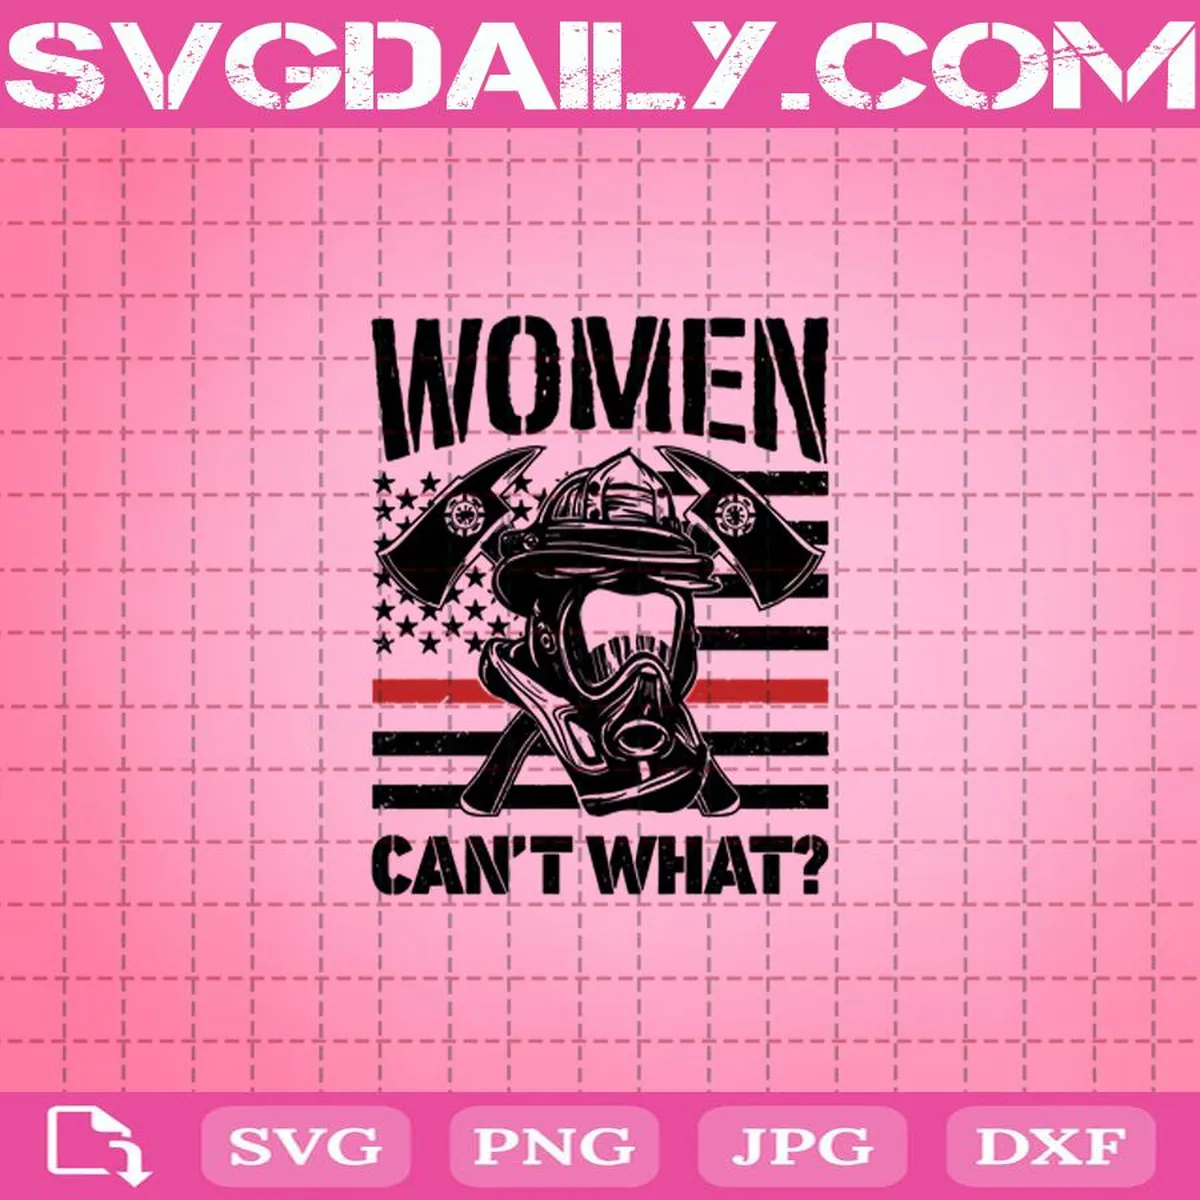 Firefighter Women Can't What Svg, Firefighter Svg, Women Firefighter Svg, Thin Red Line Svg, Firefighter Gifts Svg